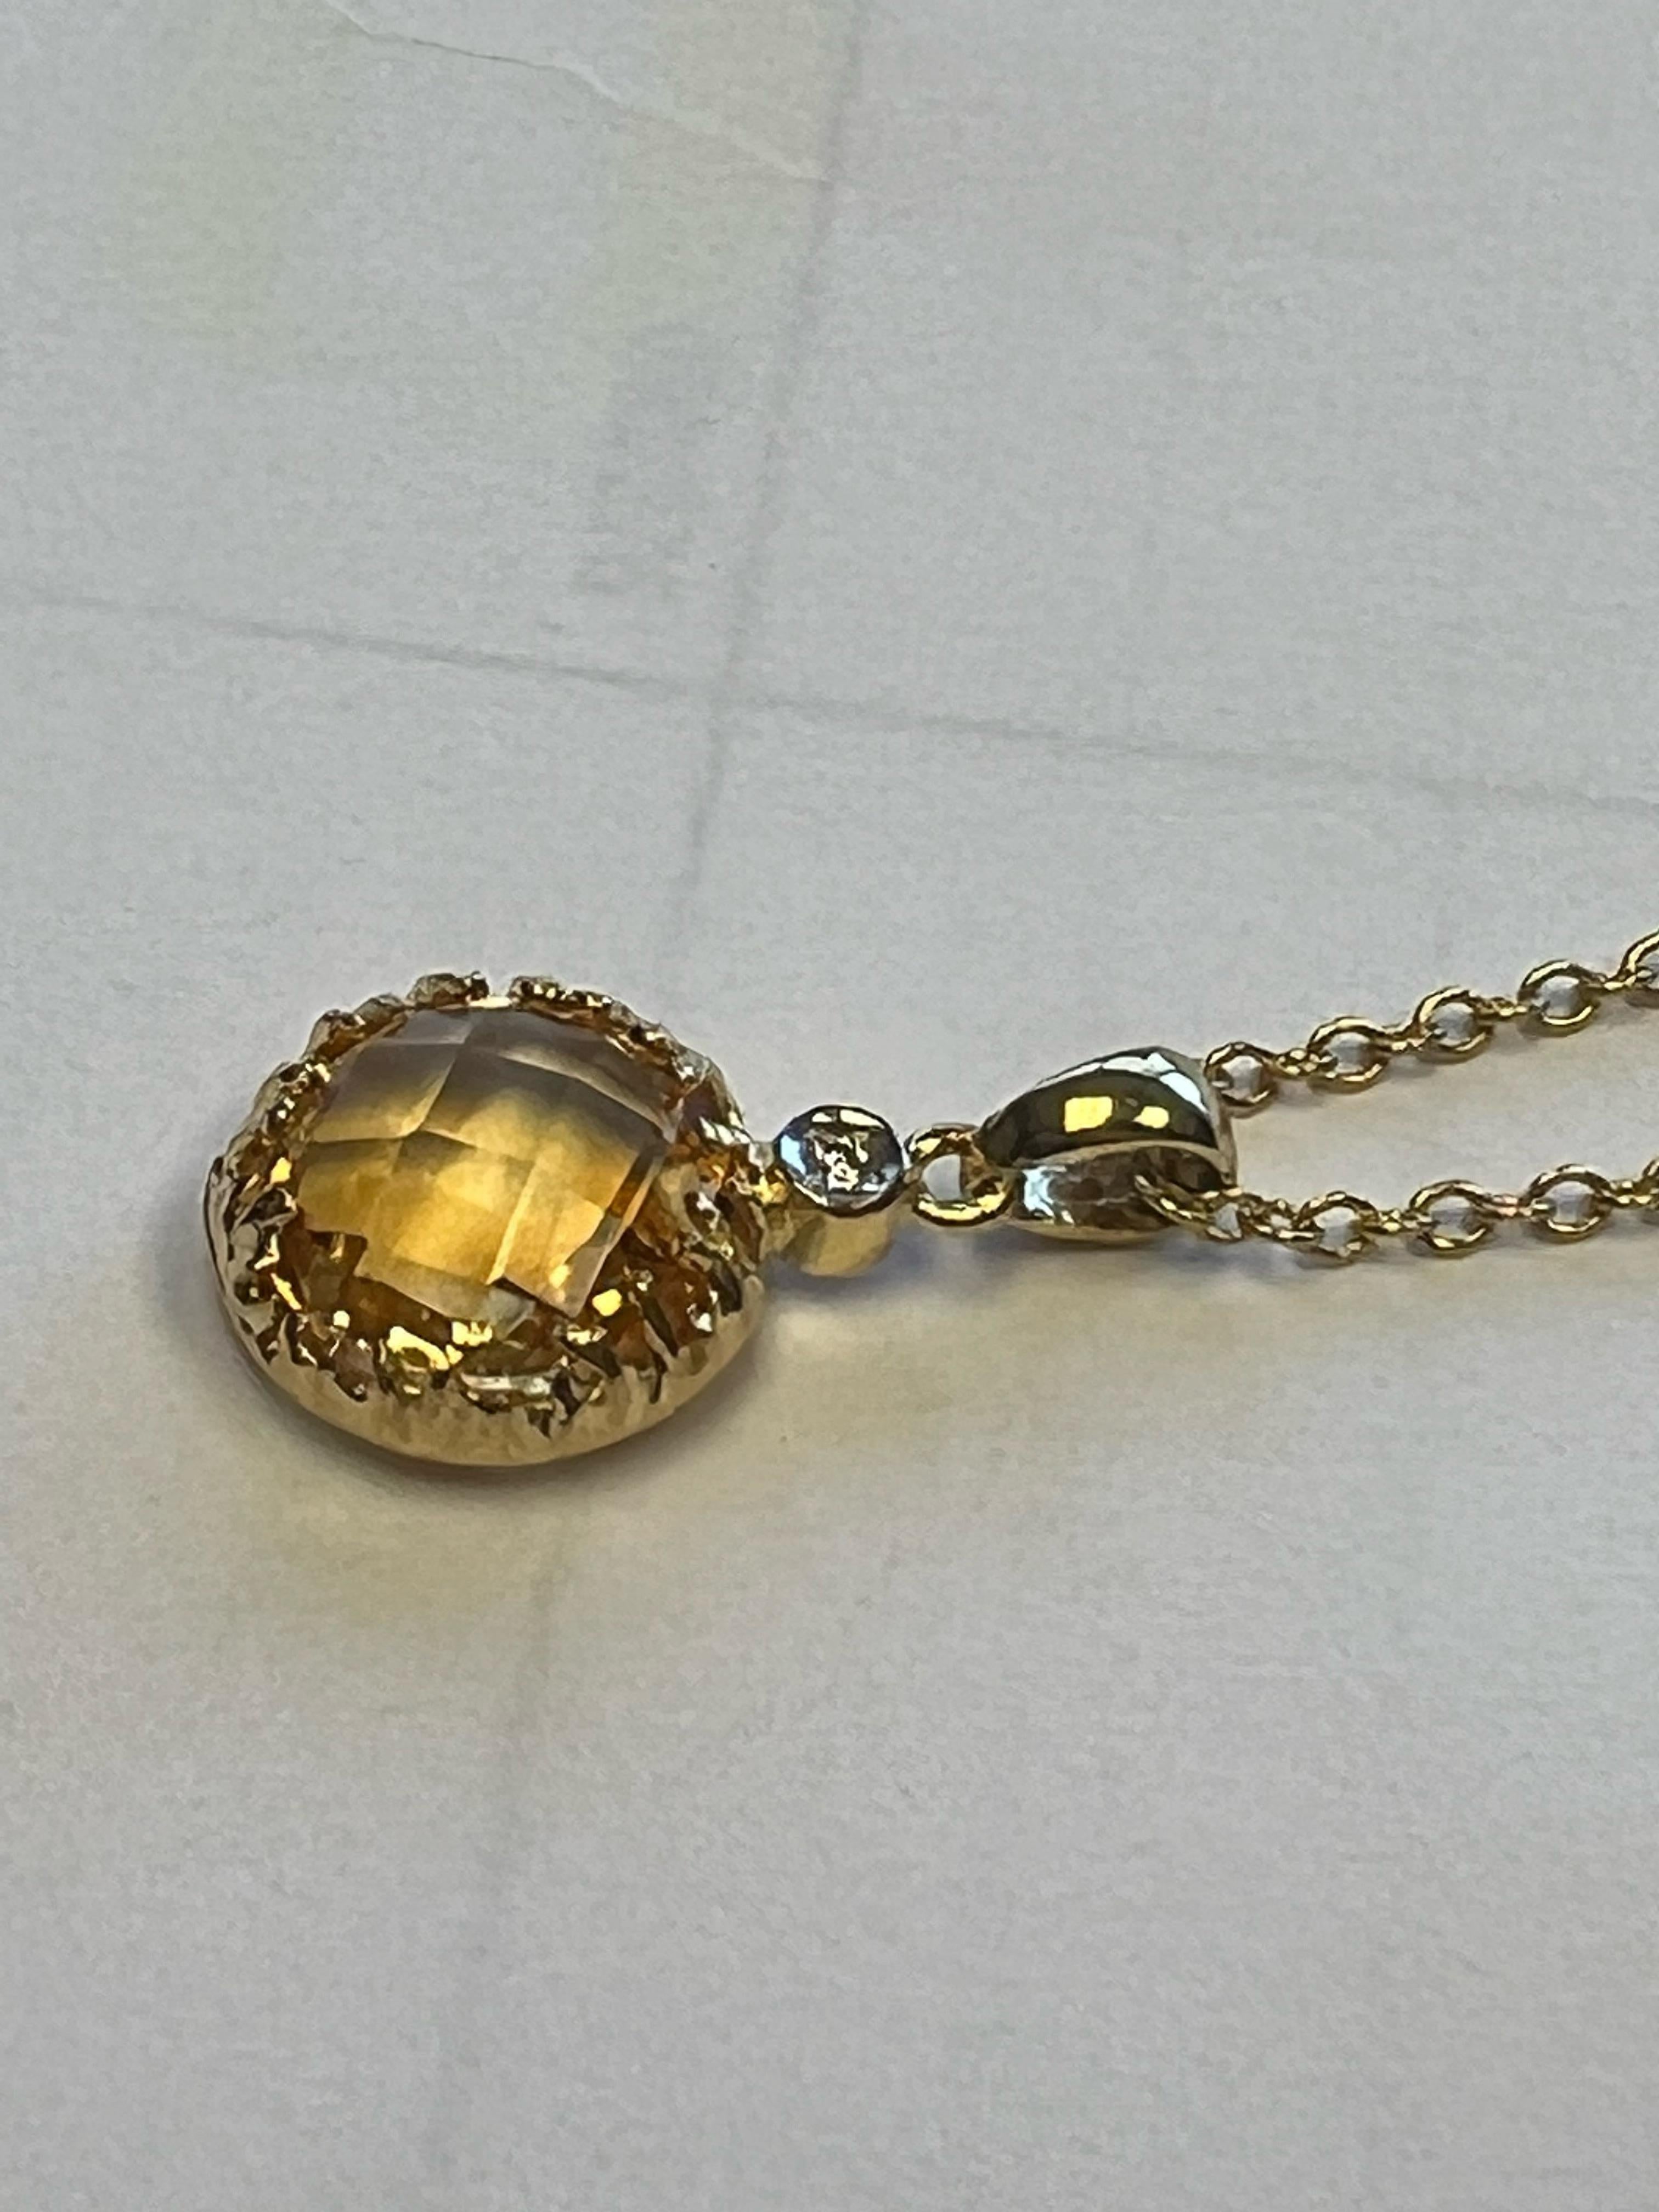 Handcrafted 14k Yellow Gold 3.35 Carat Citrine Color Stone Pendant In New Condition For Sale In Great Neck, NY